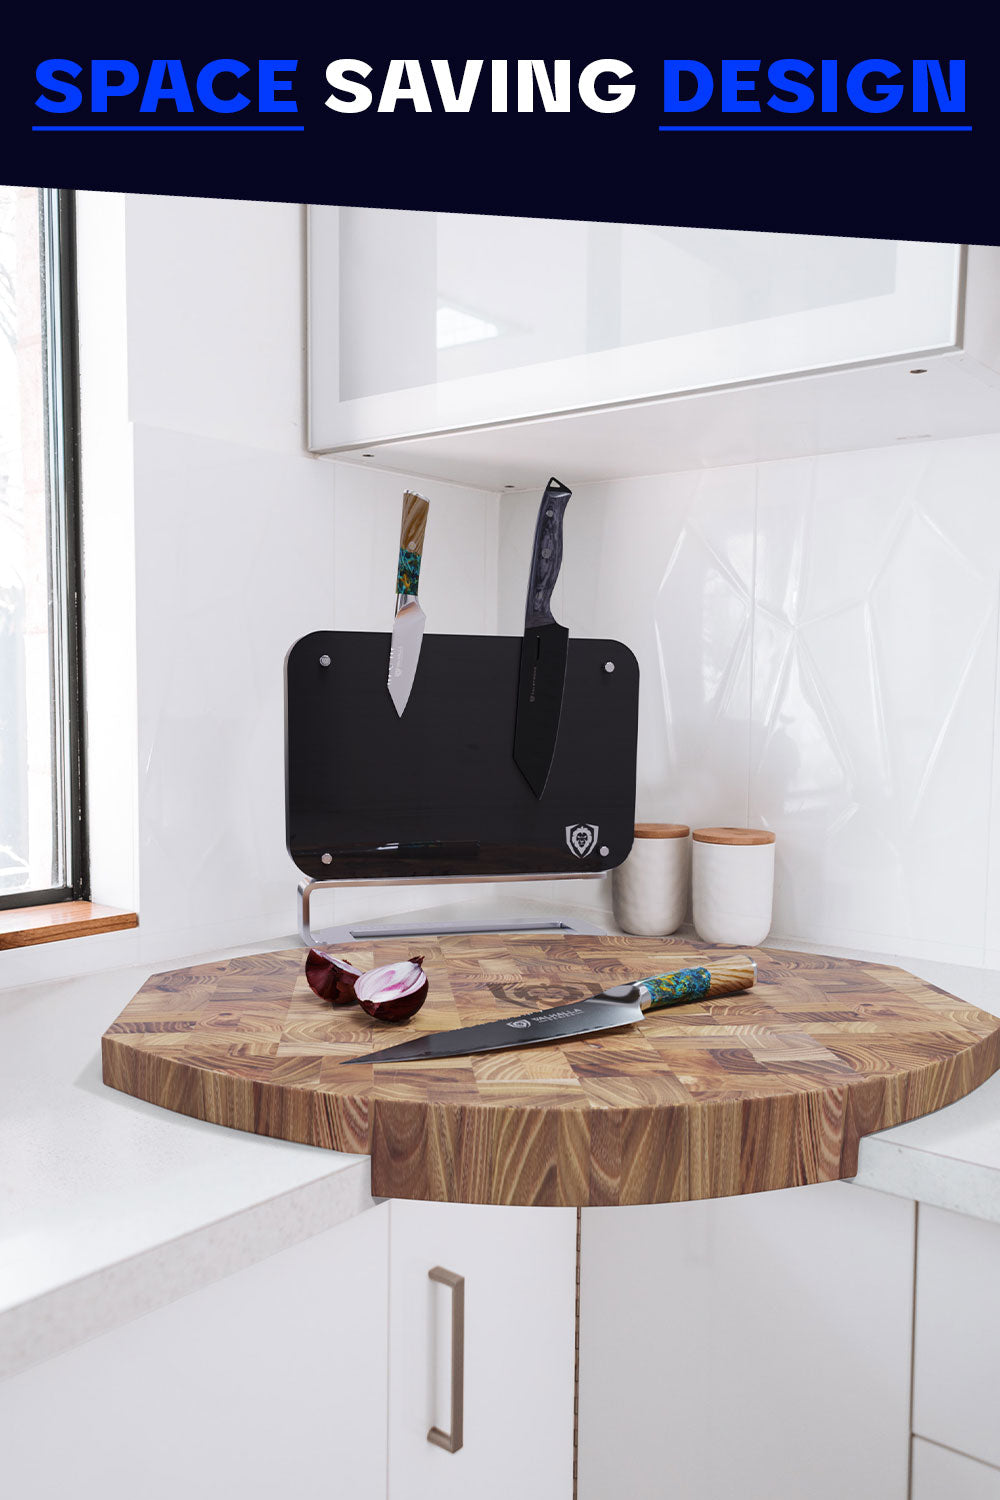 Dalstrong corner cutting board featuring it's space saving design.